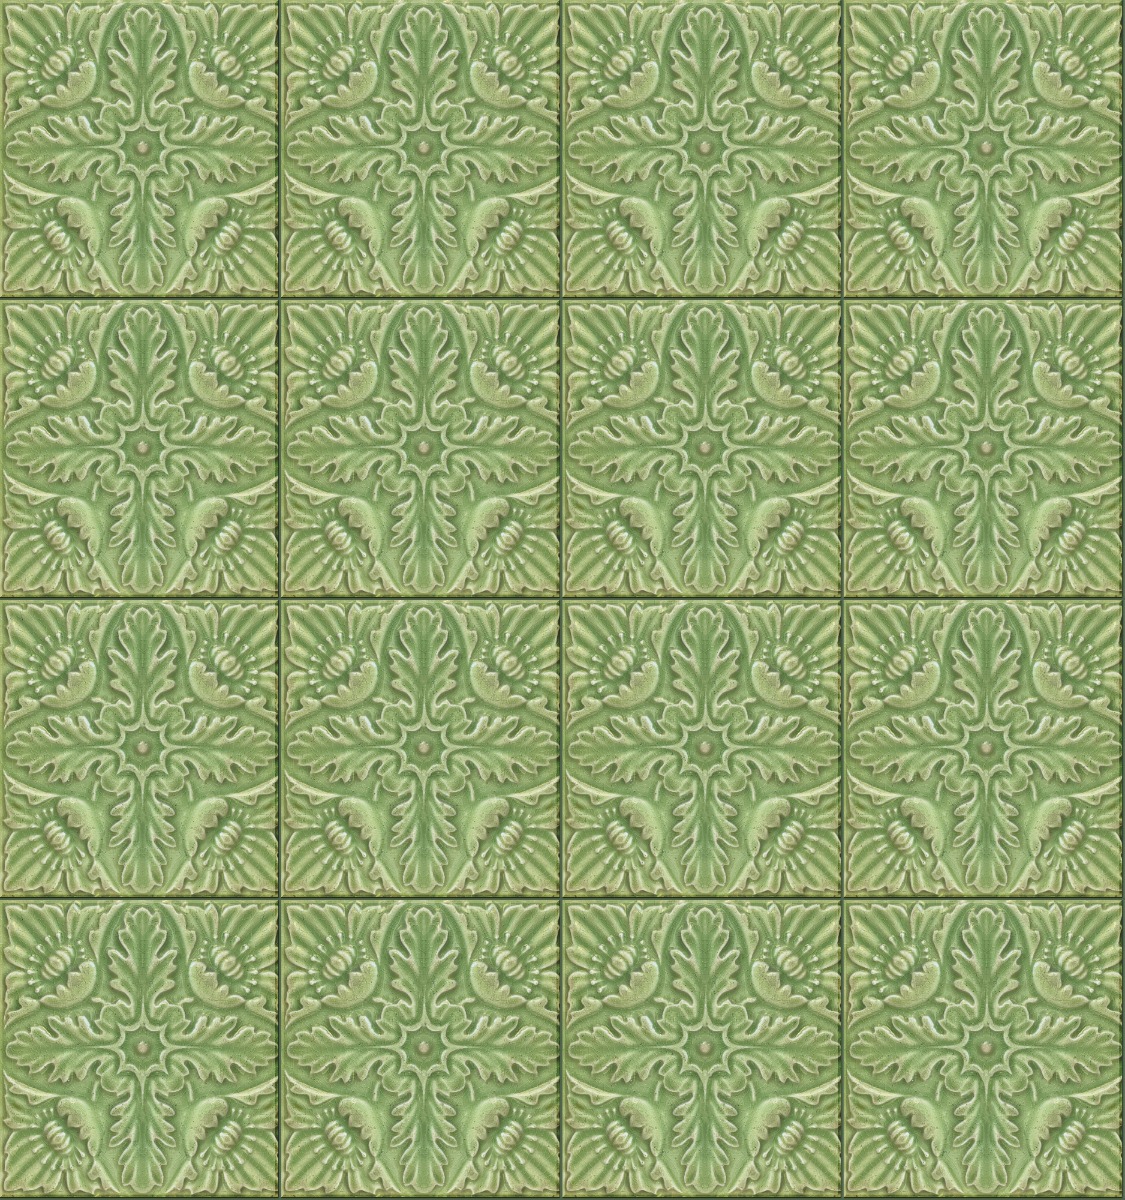 A seamless tile texture with green tenement tile tiles arranged in a Stack pattern